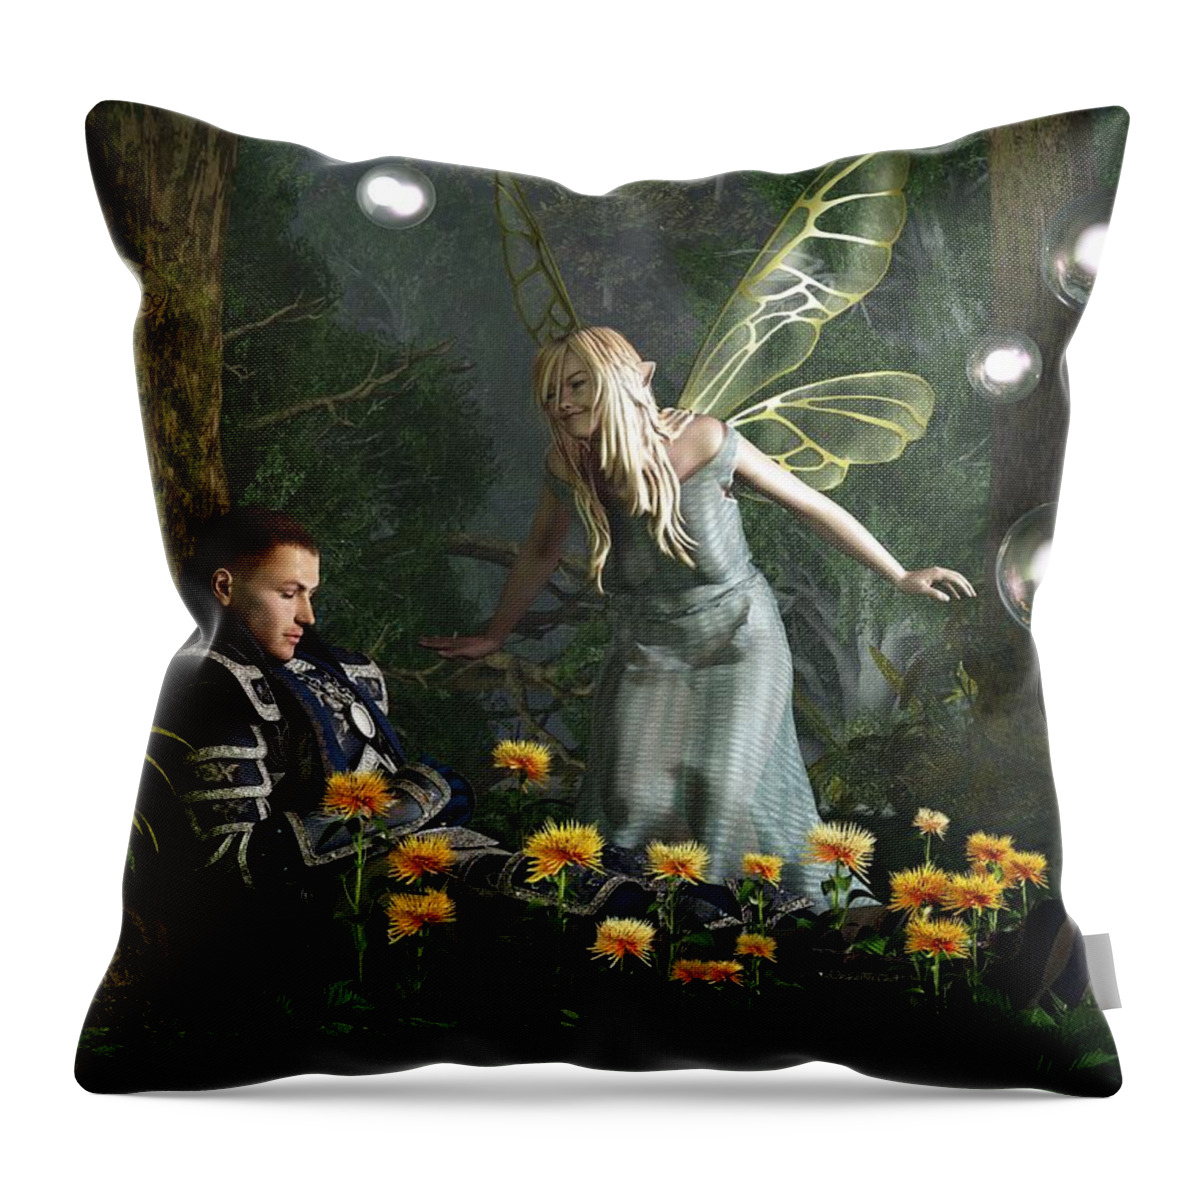 Knight Throw Pillow featuring the digital art The Knight and the Faerie by Daniel Eskridge